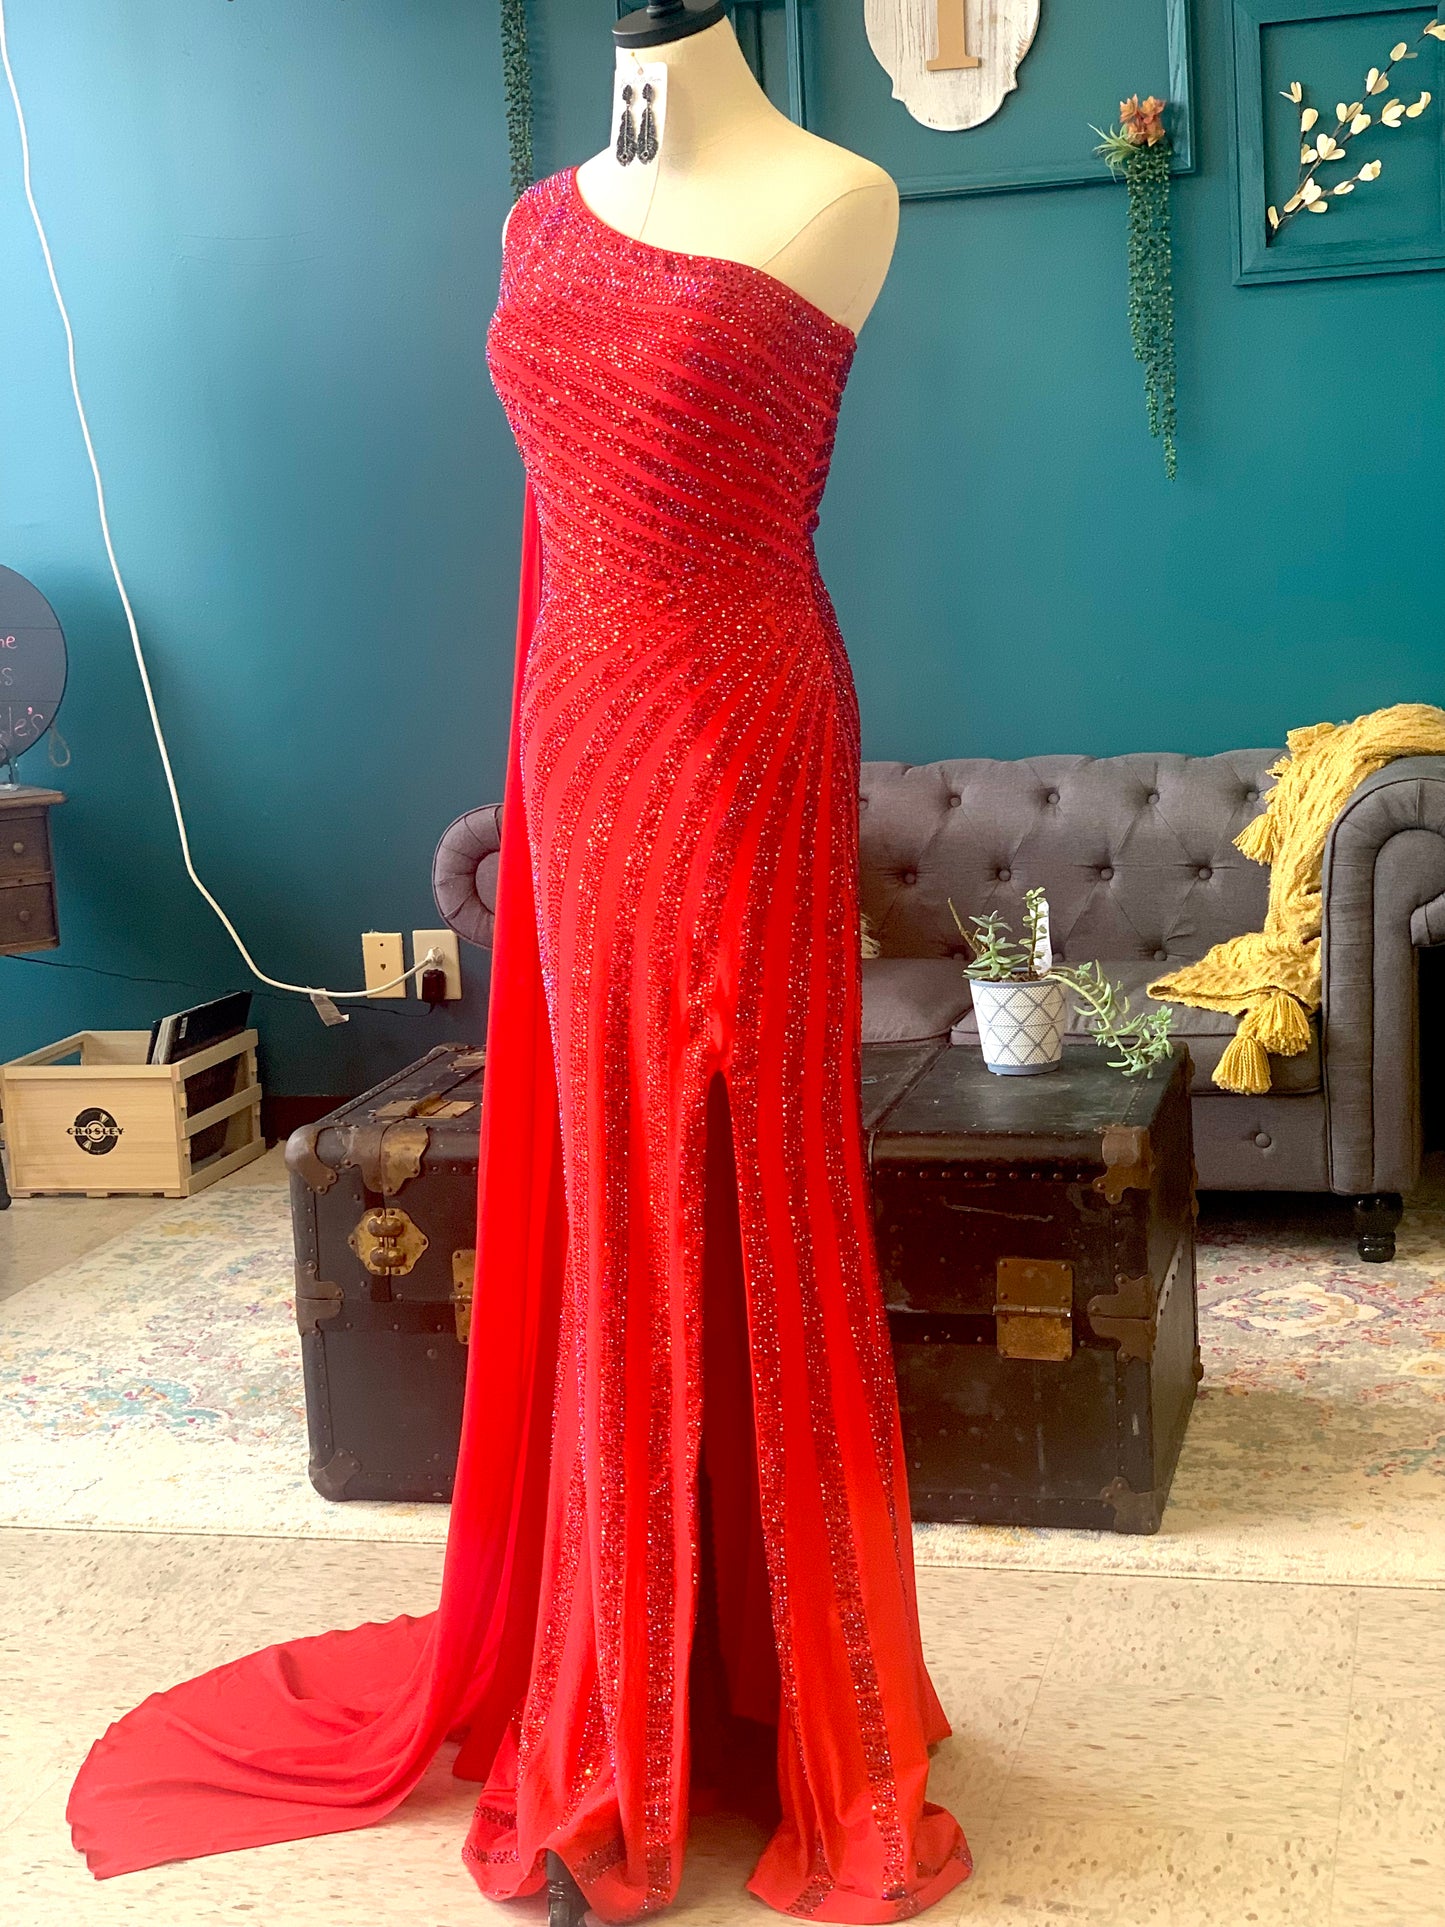 Lady in Red Gown